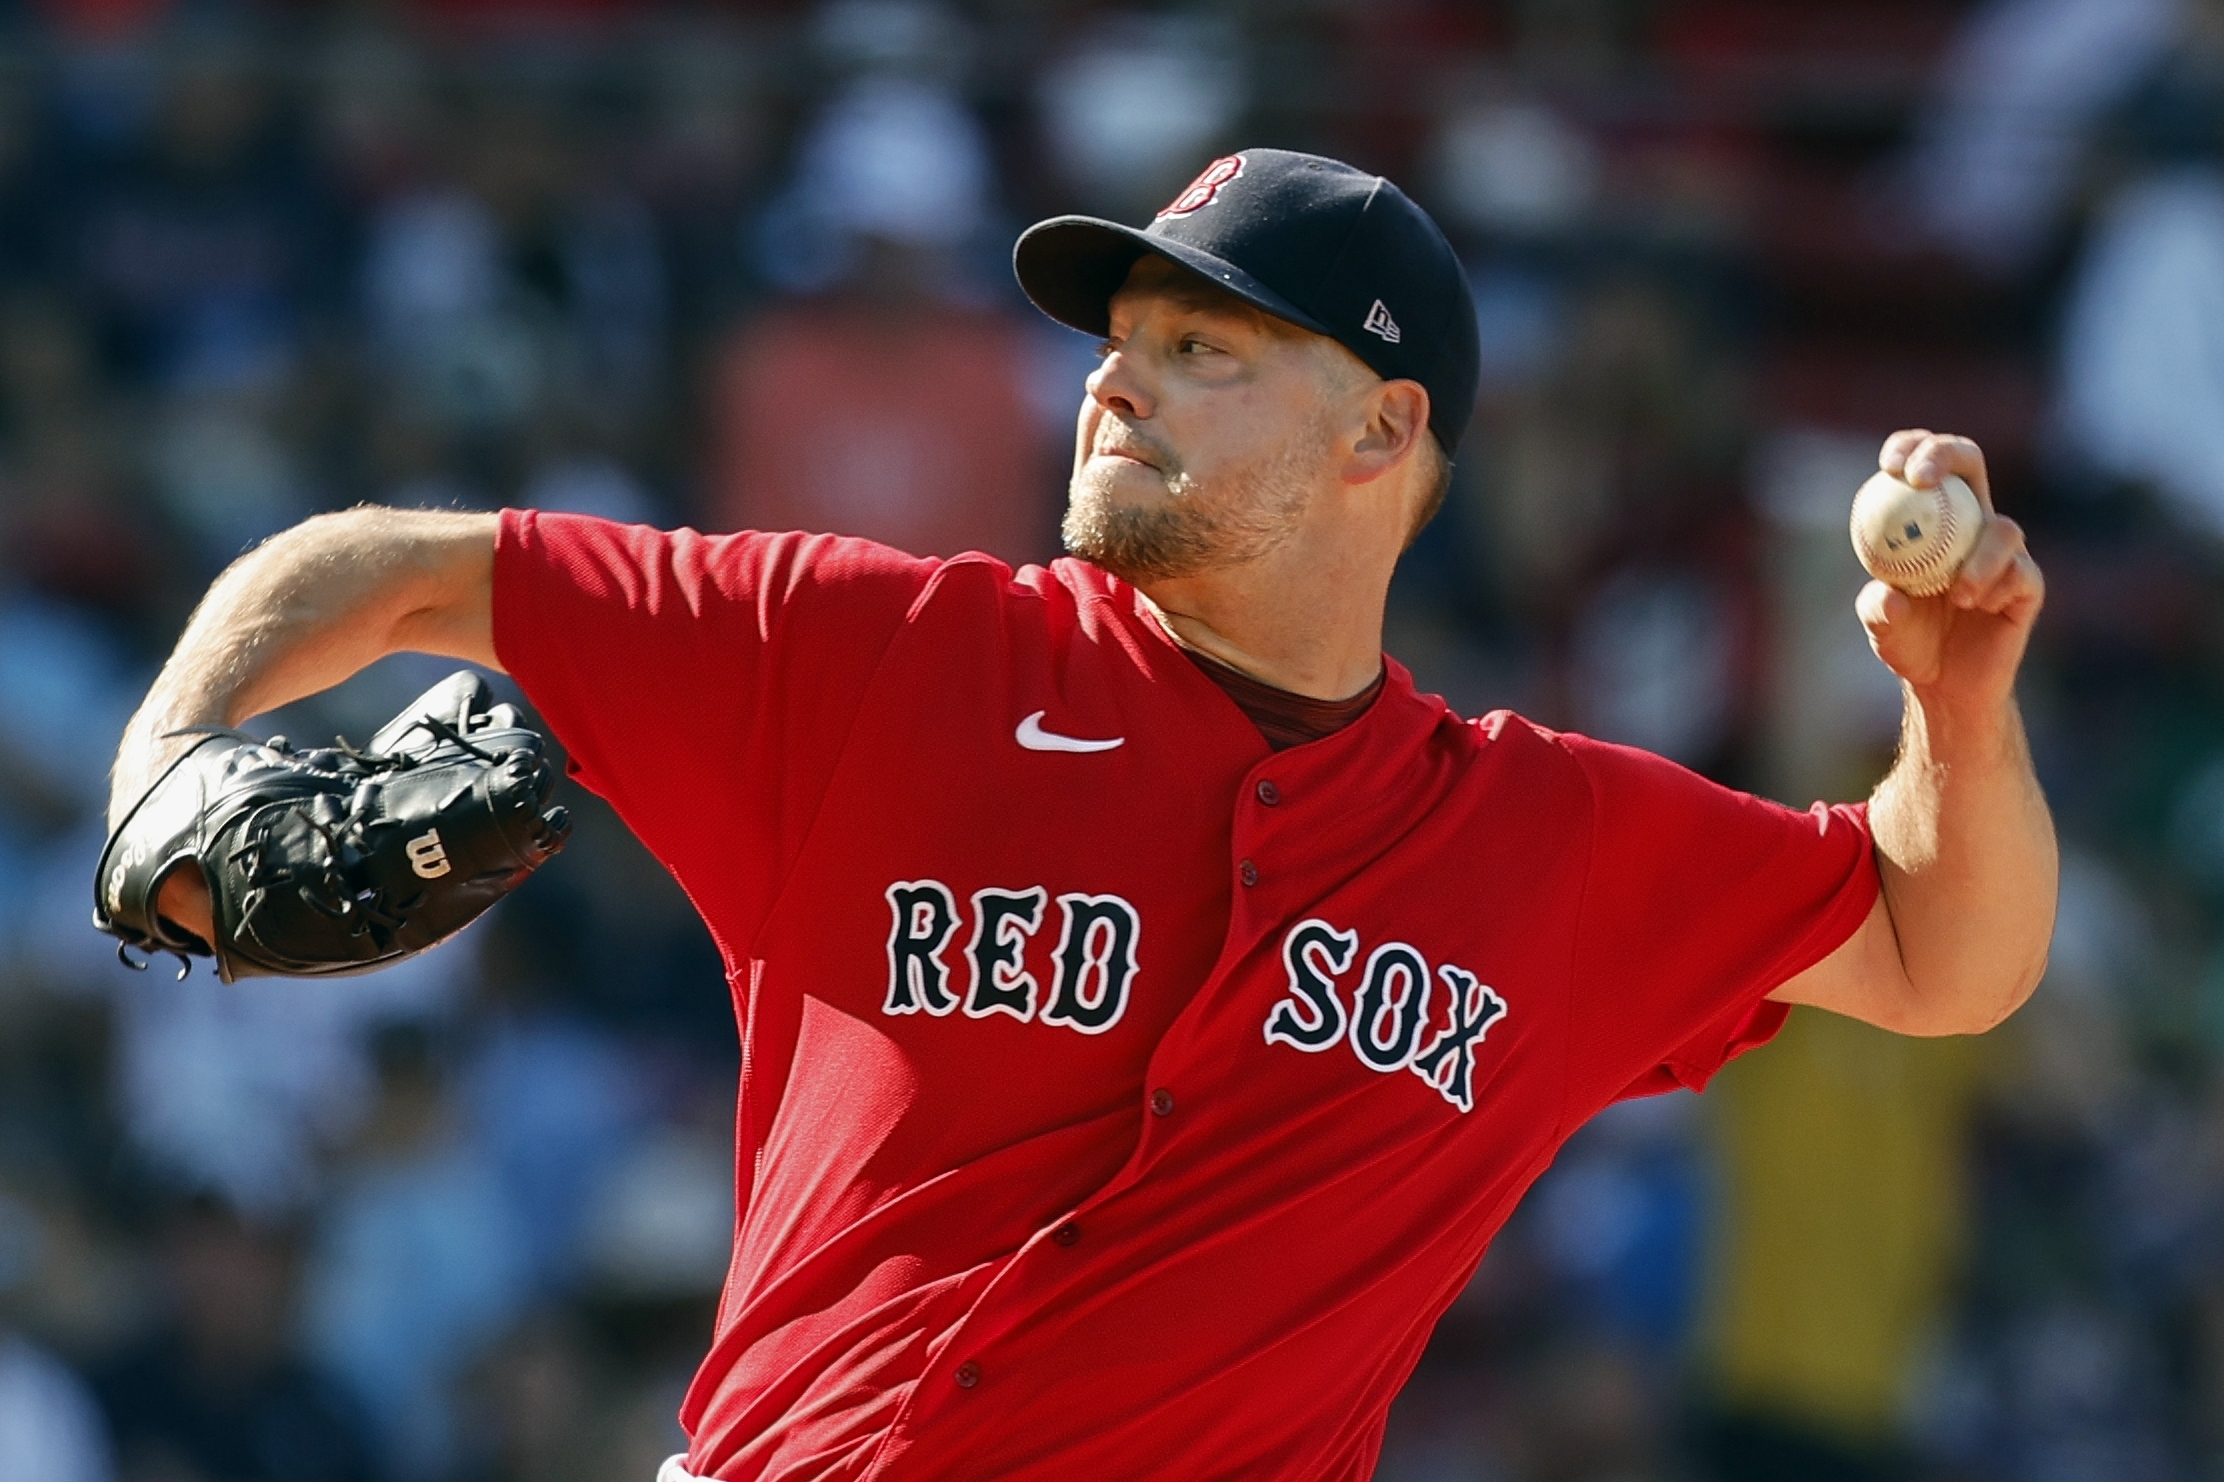 Worcester makes its presence felt as depth shines in Red Sox